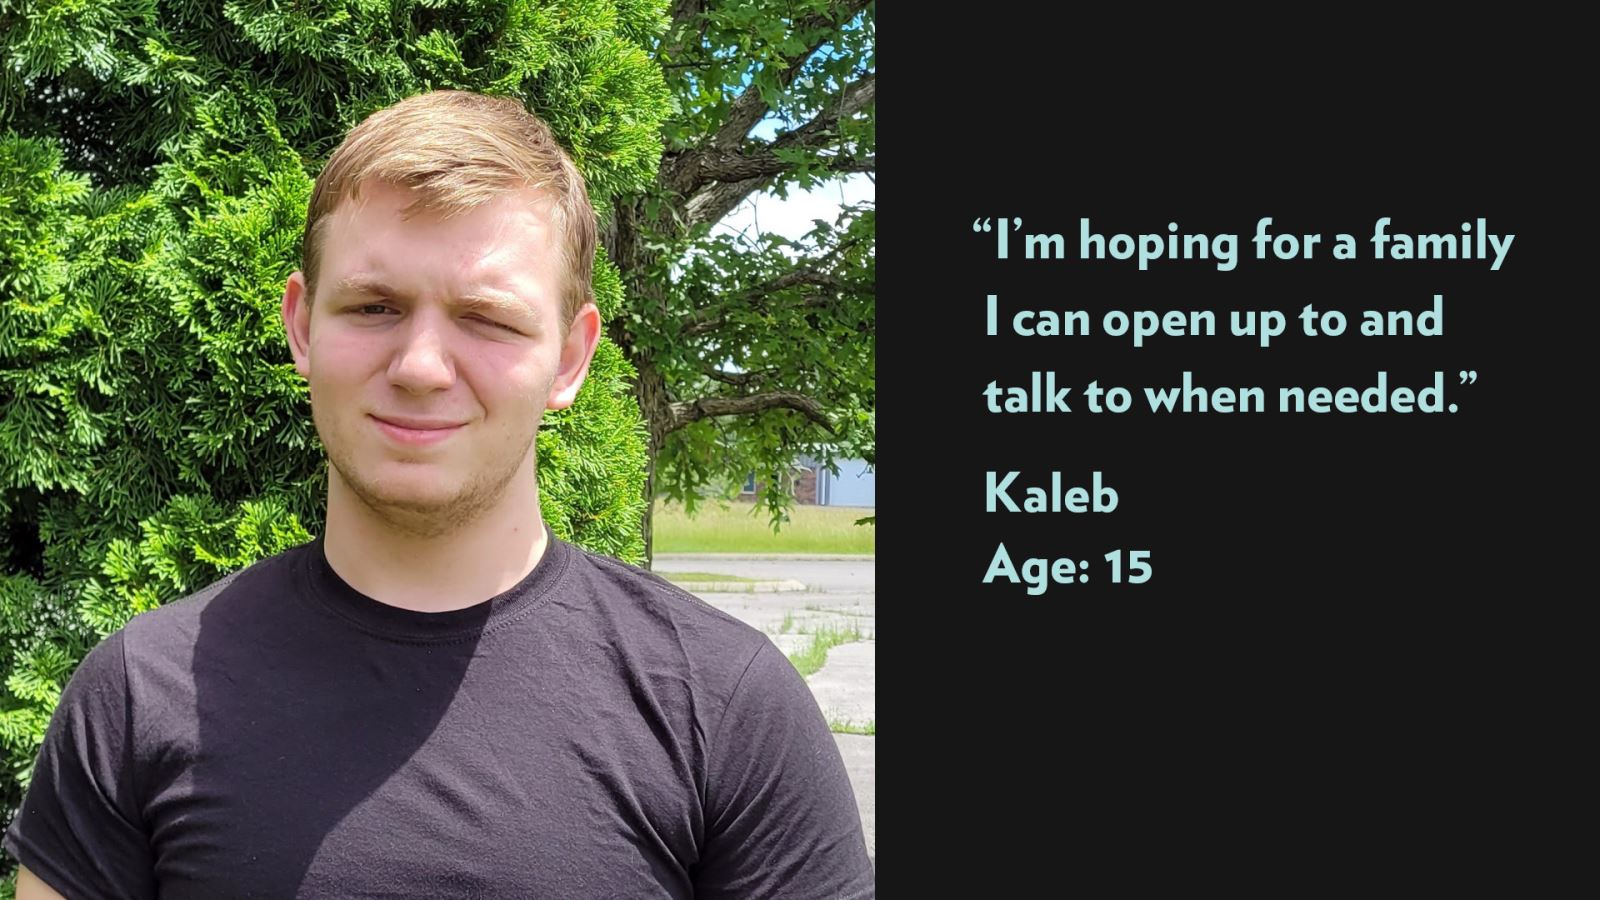 I’m hoping for a family I can open up to and talk to when needed. Kaleb, age 15. View profile.